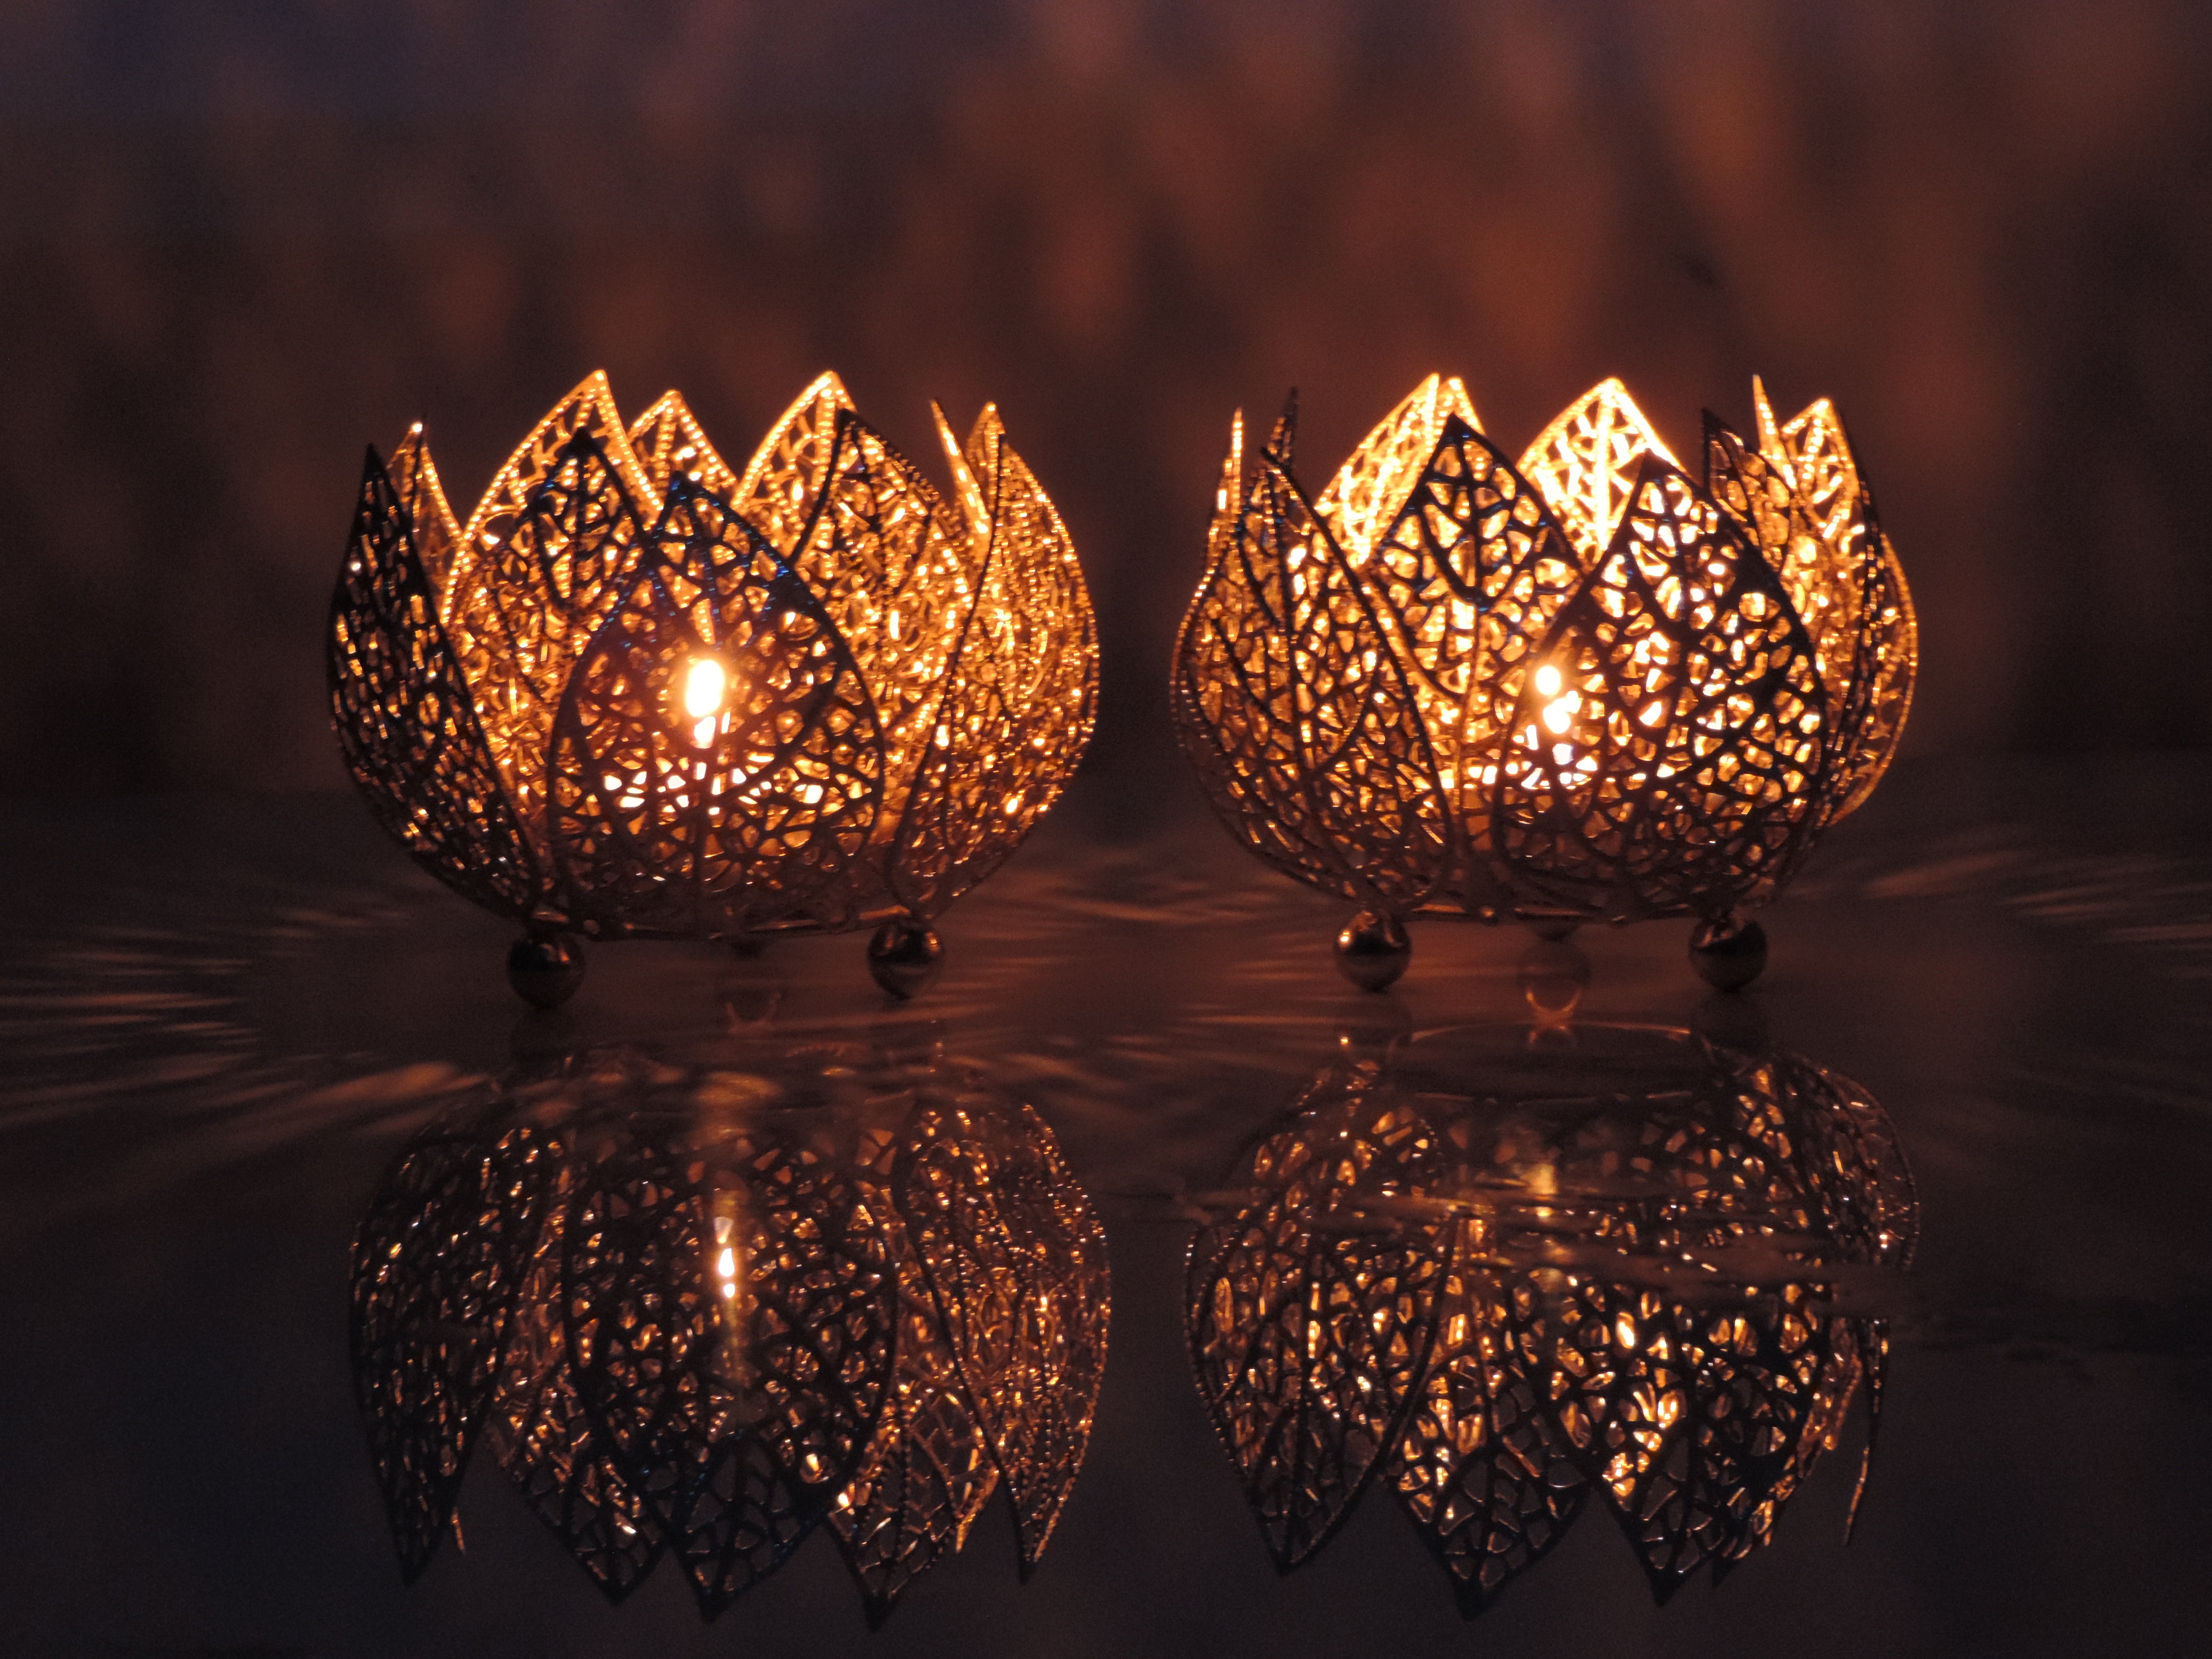 Toshakhana Collection - Set of 2 Votives with tea light holder in a Decorative Tray - Gold